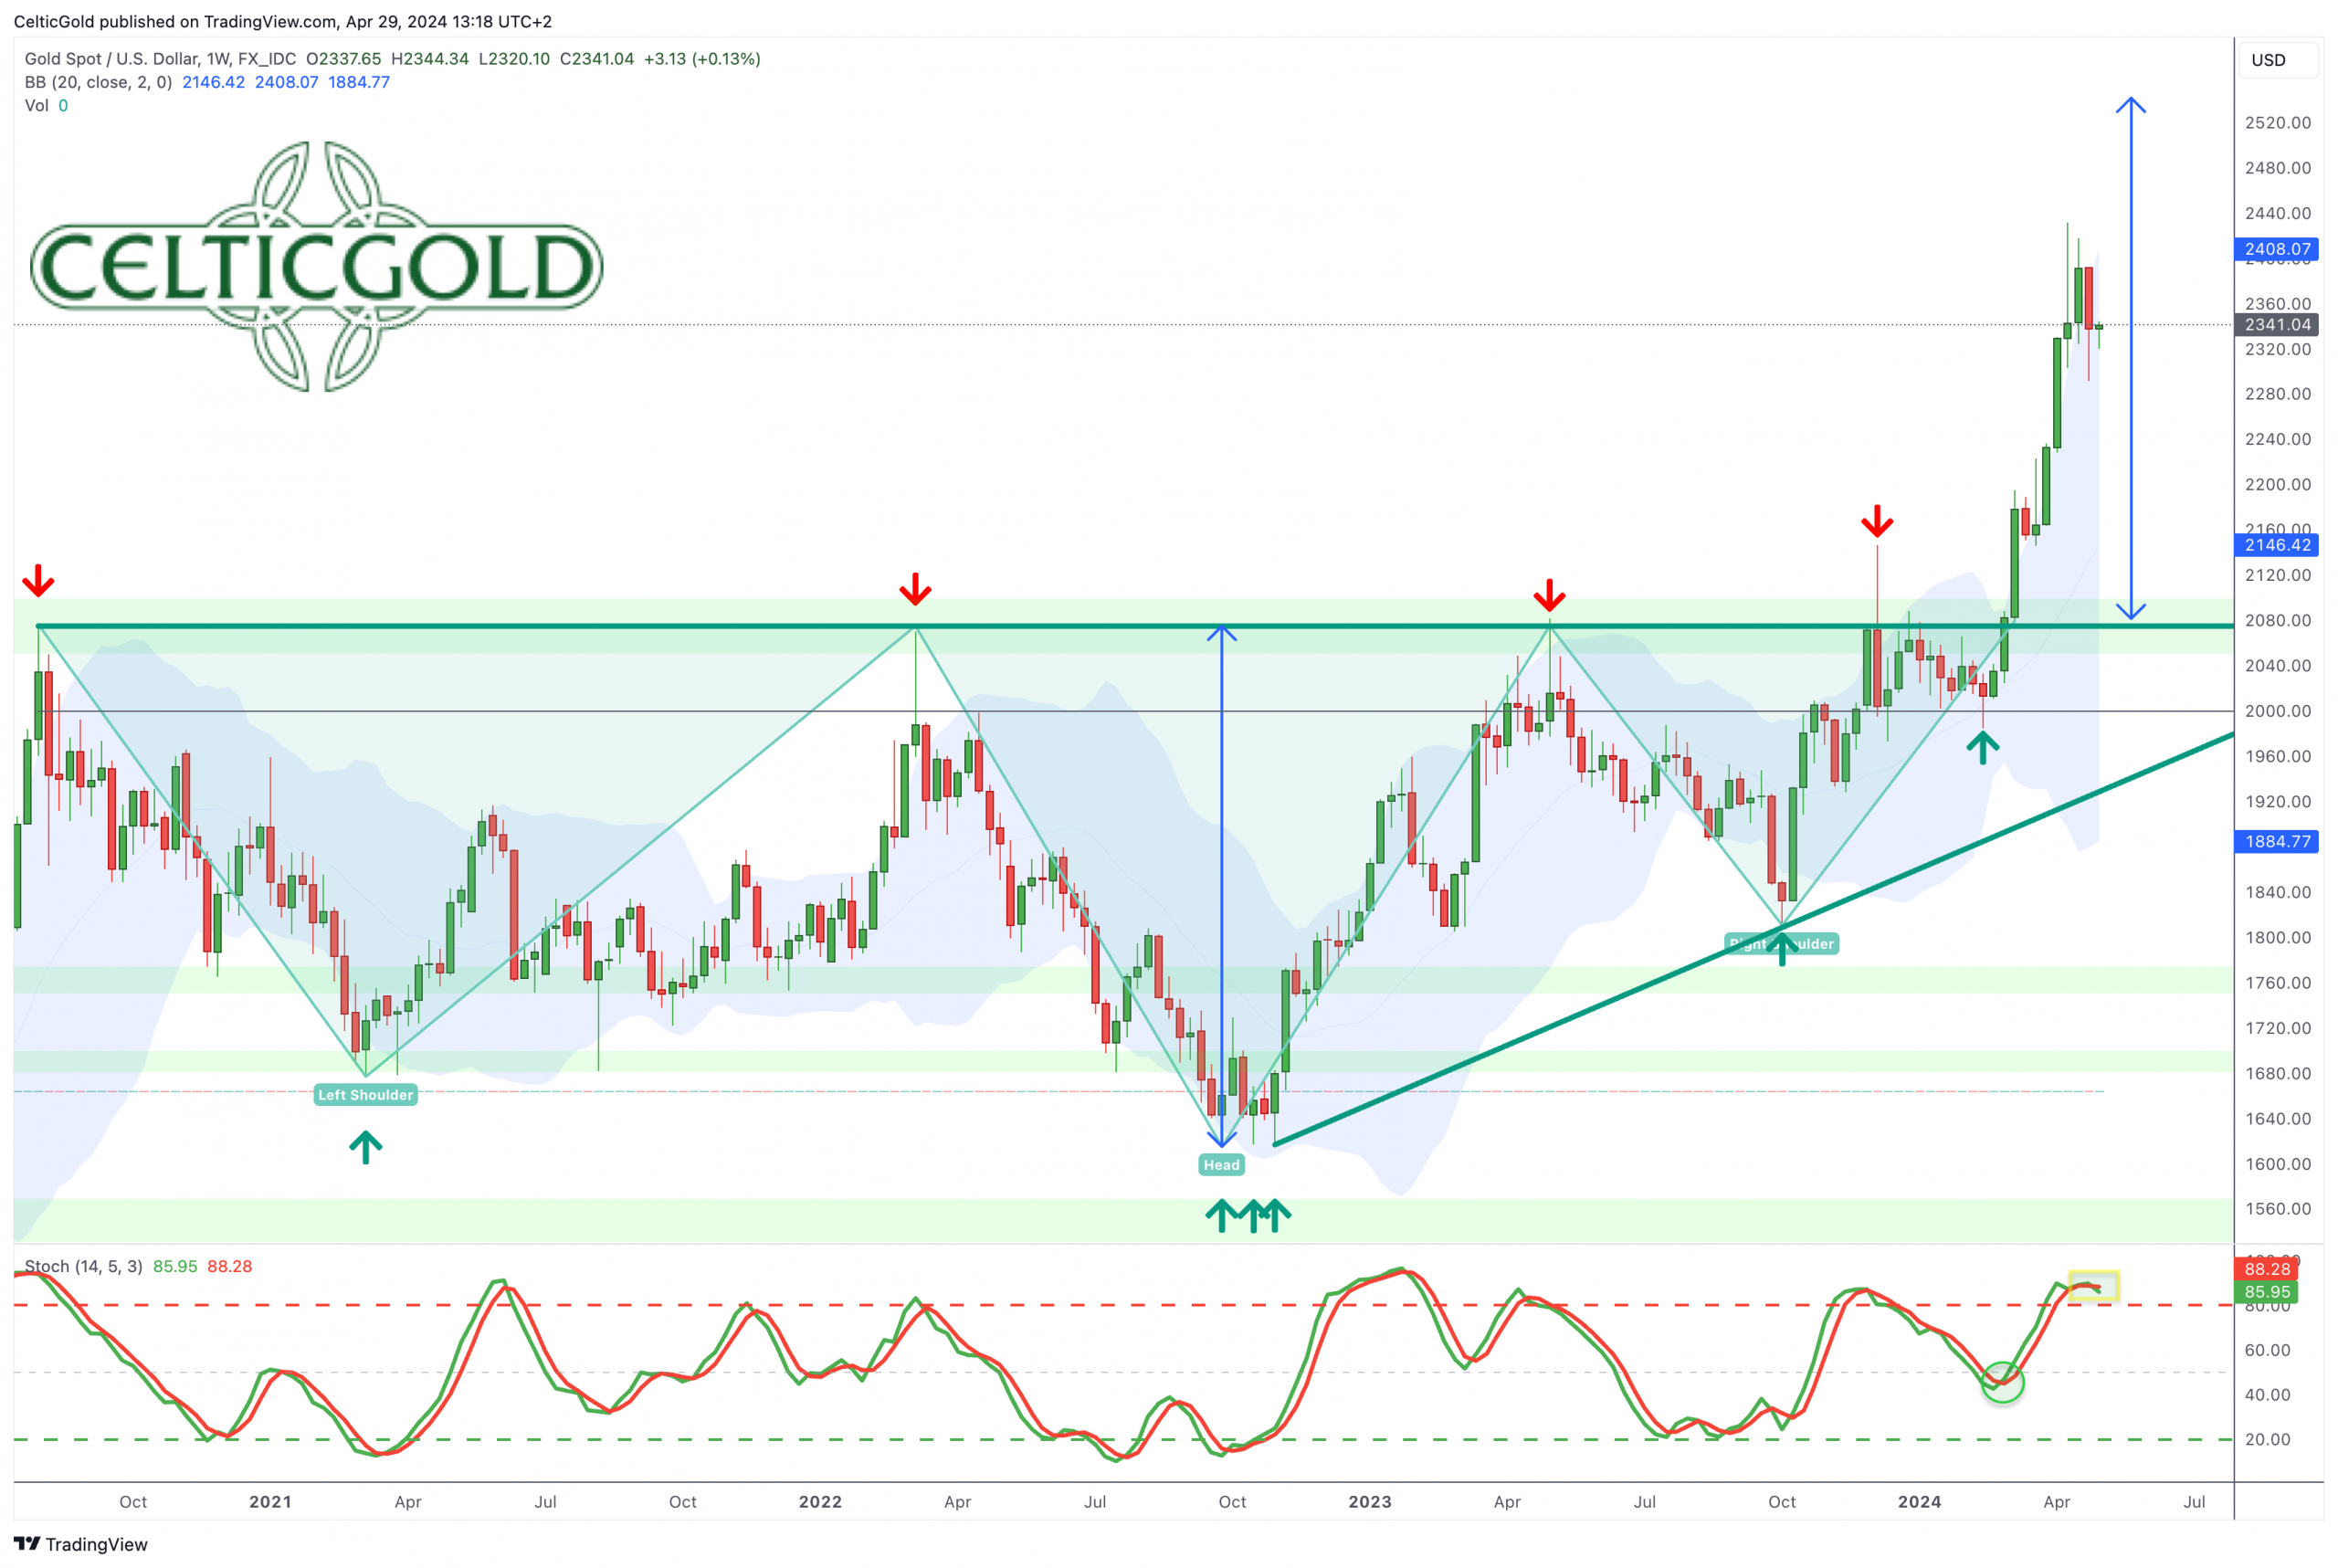 Gold in US-Dollar, weekly chart as of April 29th